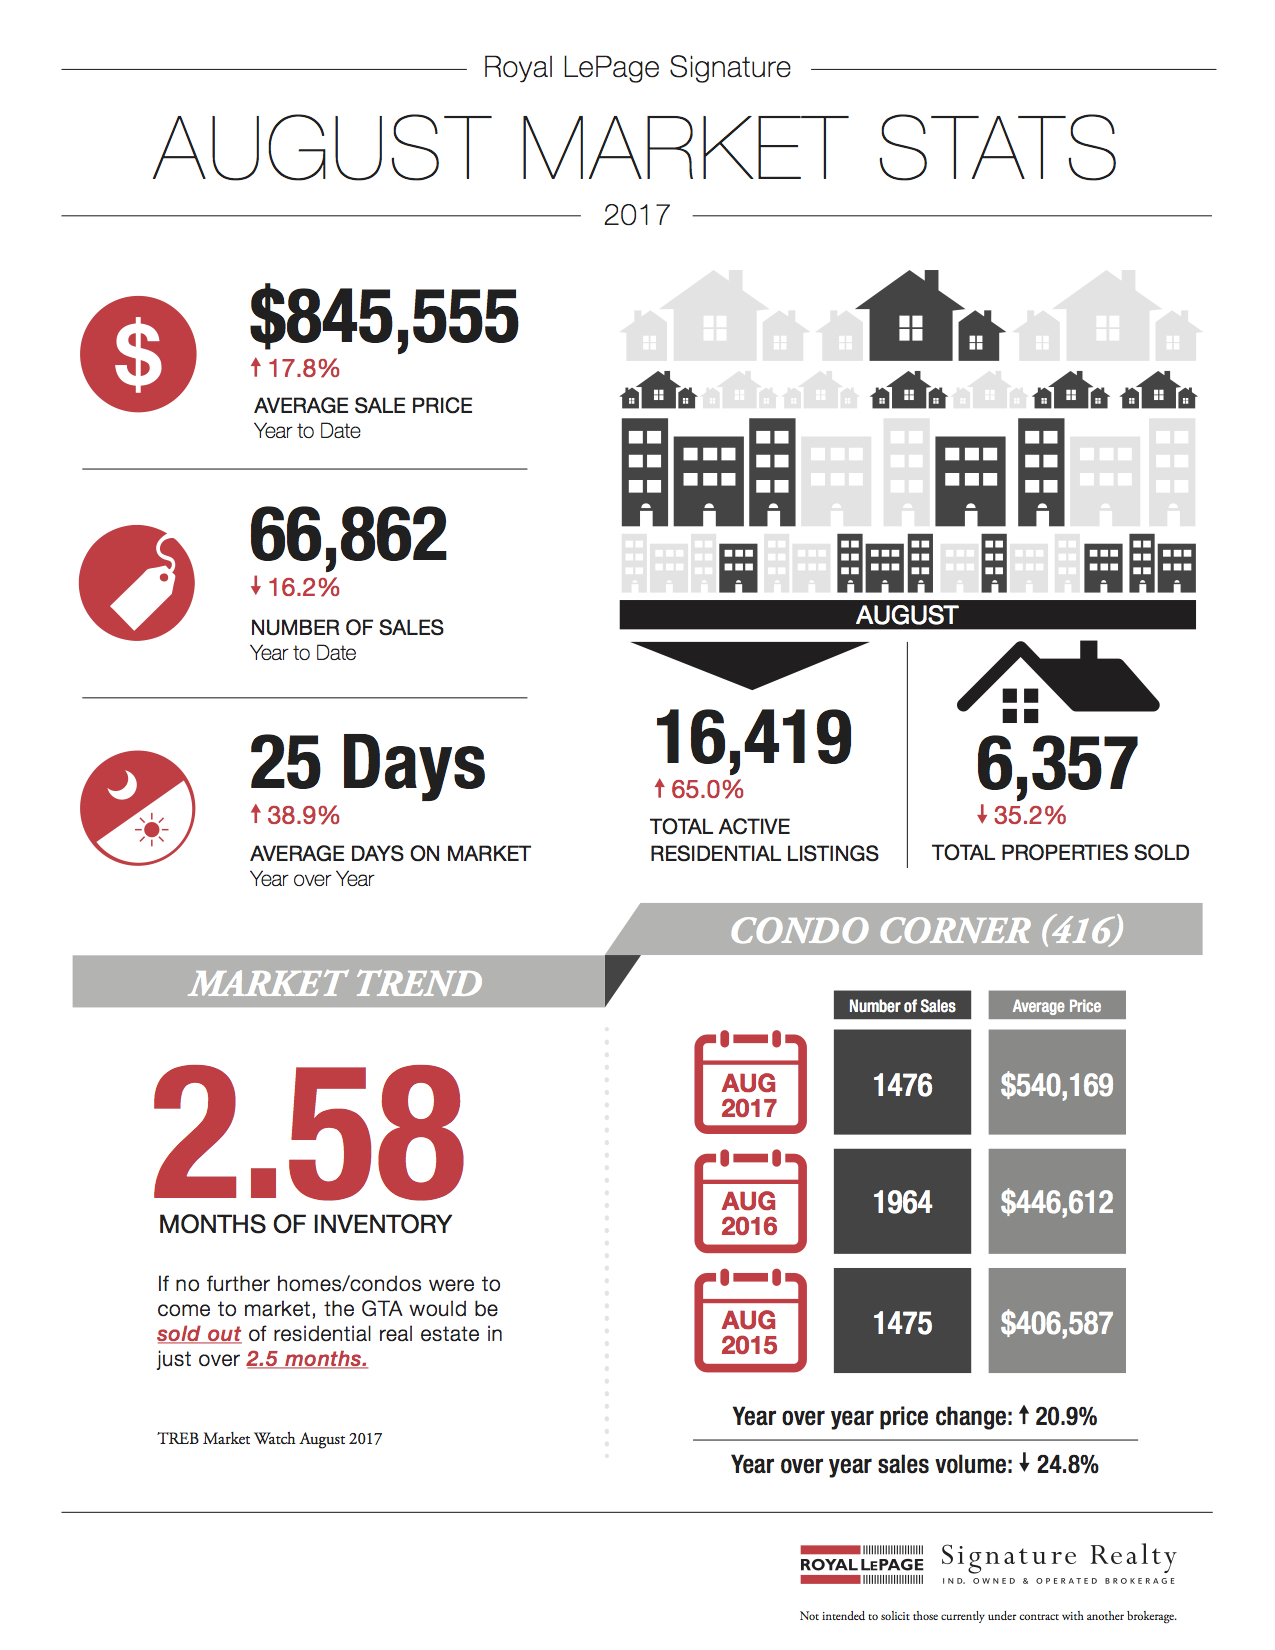 August 2017 Market Stats: Infographic & Report Photo